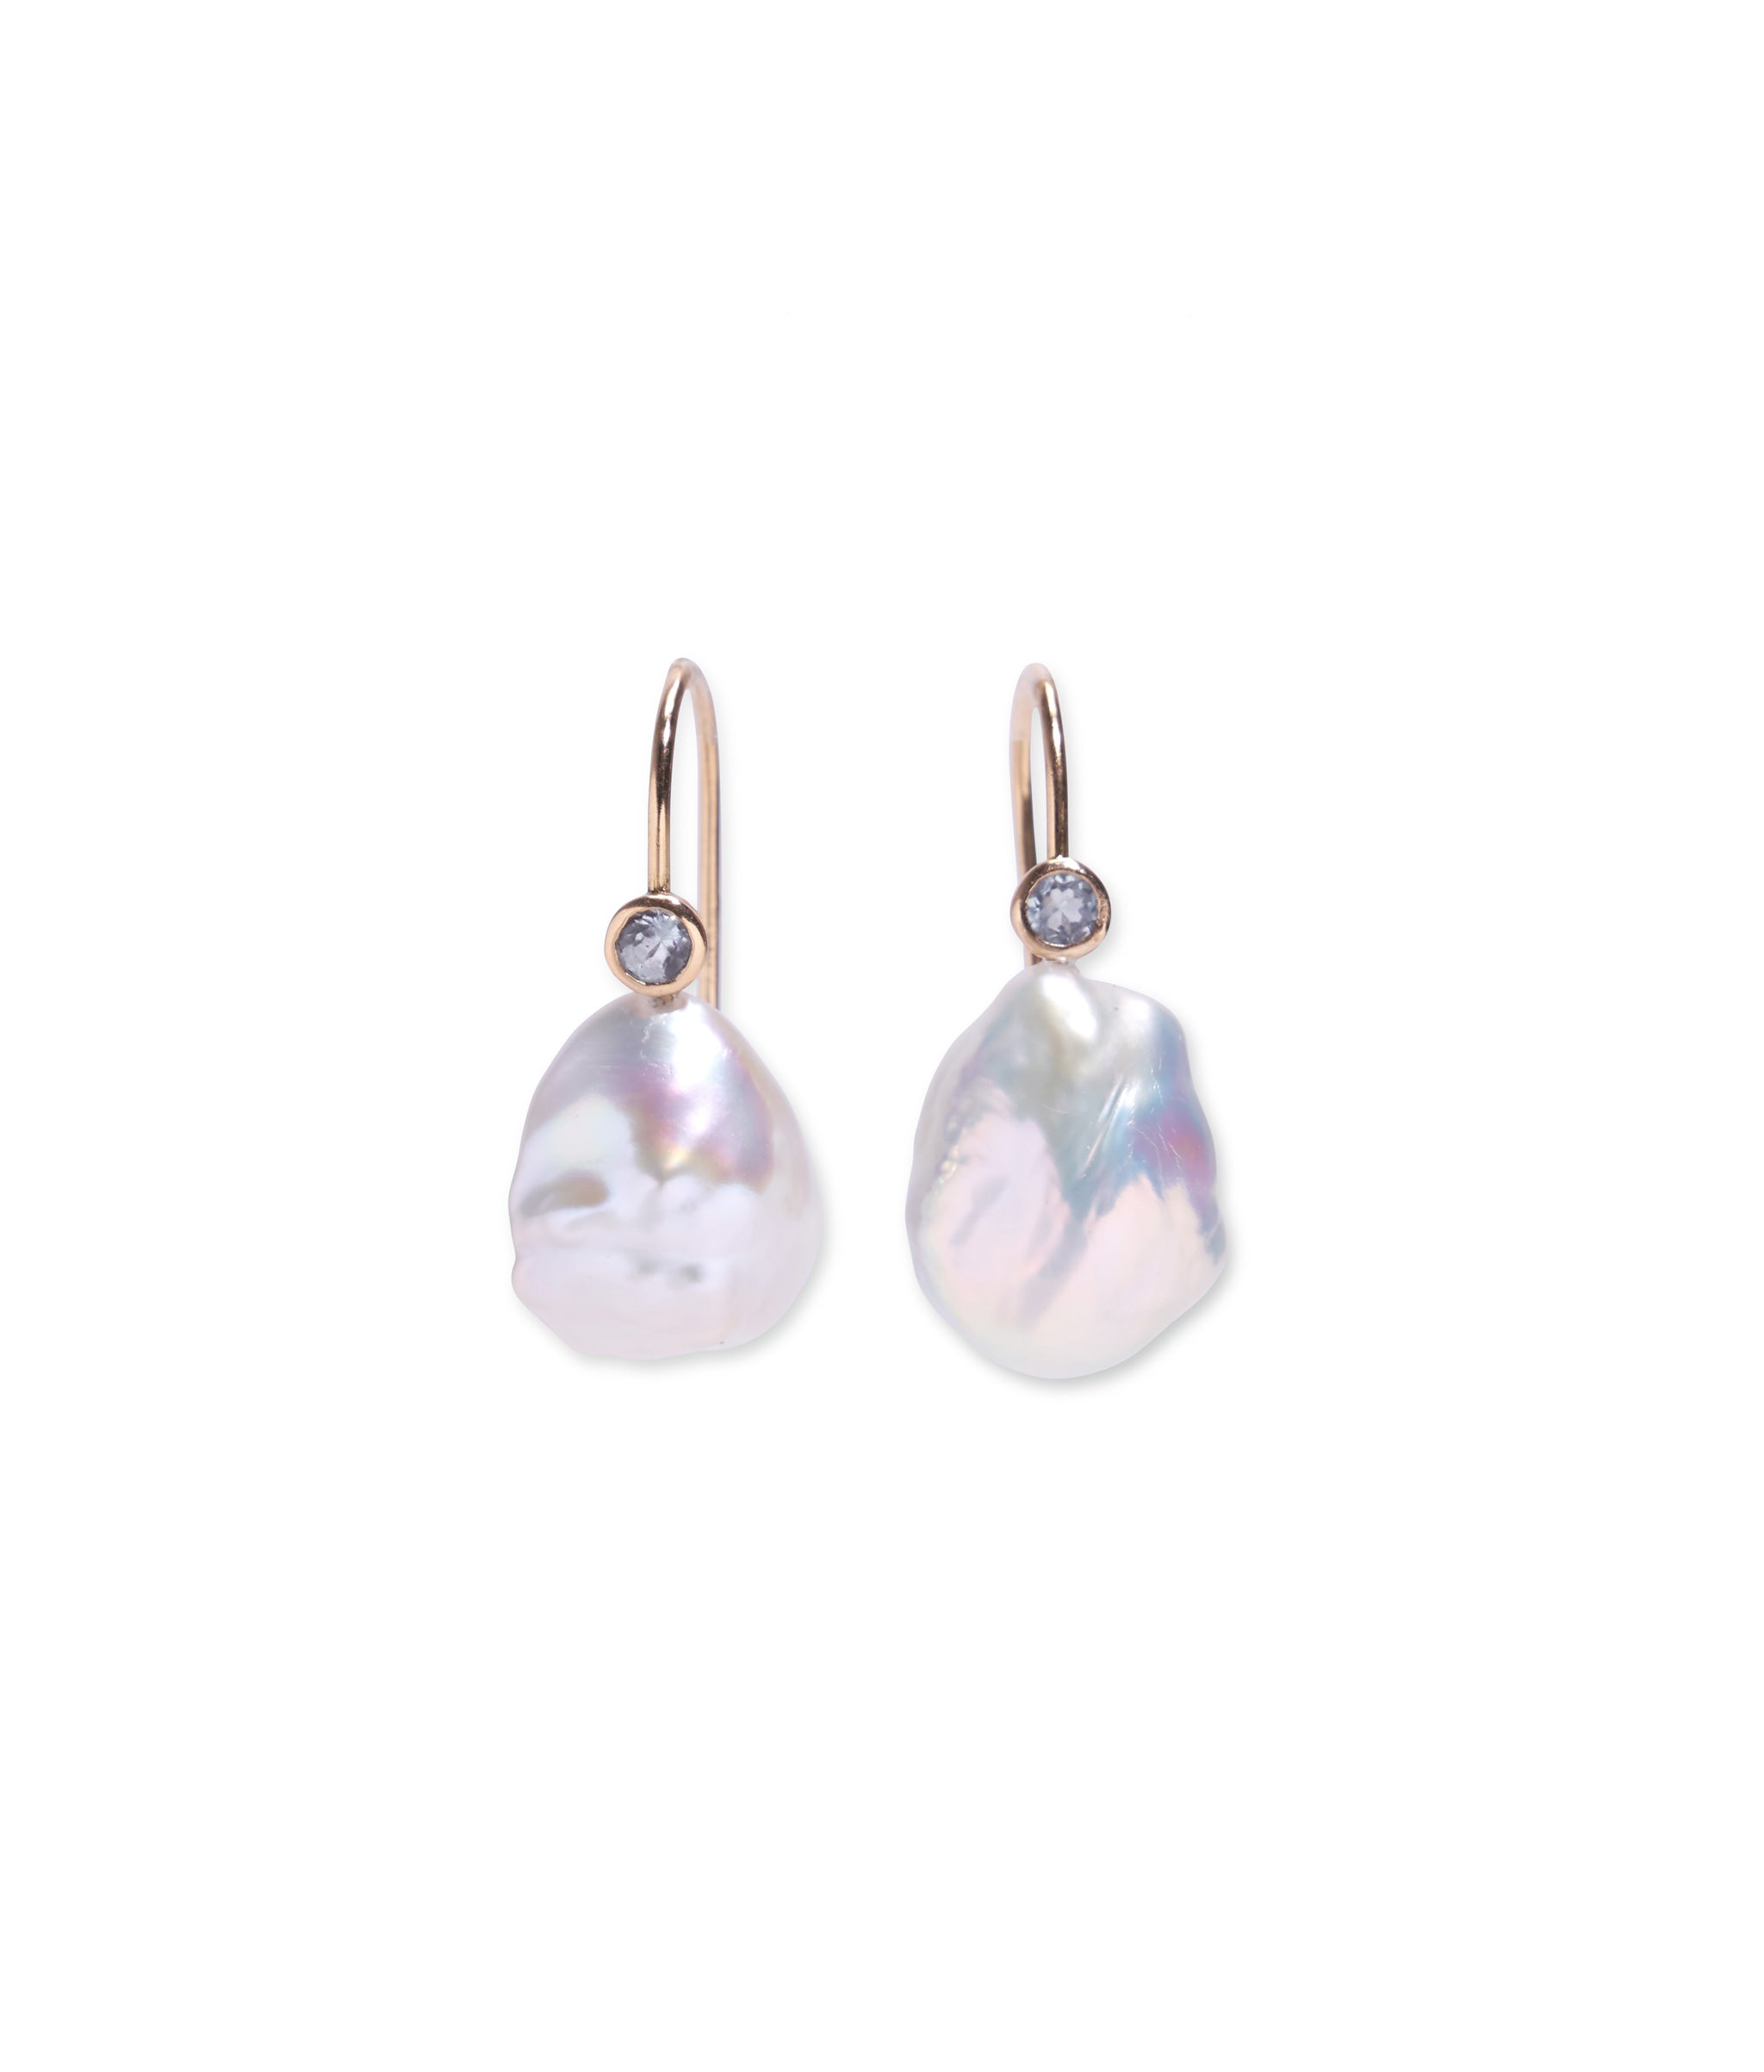 14k Gold Claude Earrings in Pearl & Sky Blue Topaz. 14k gold with freshwater Keshi pearl drops and blue topaz details.